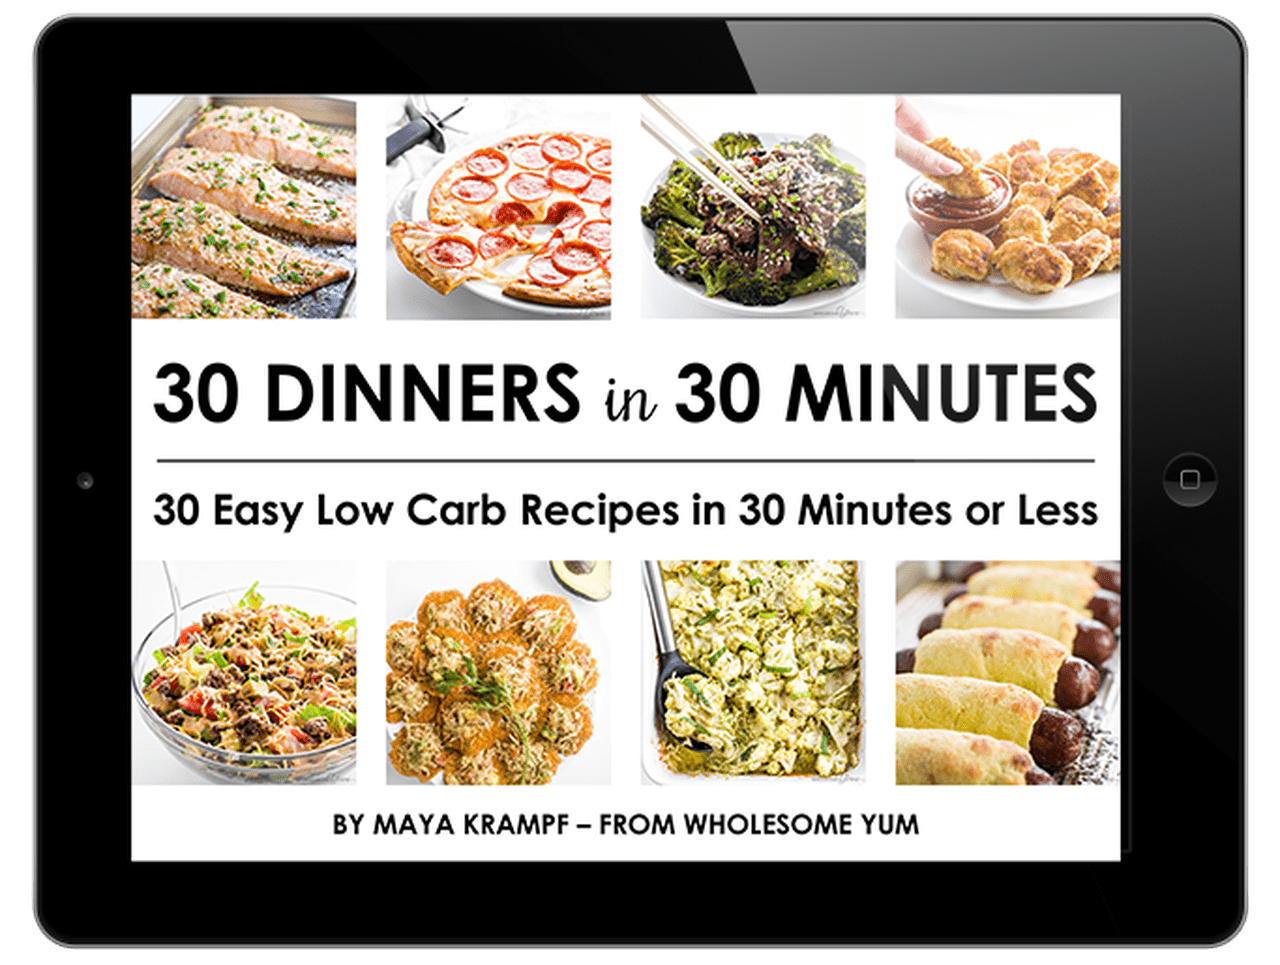 30 Dinners in 30 Minutes Cookbook - 30 Easy Low Carb Recipes in 30 Minutes or Less